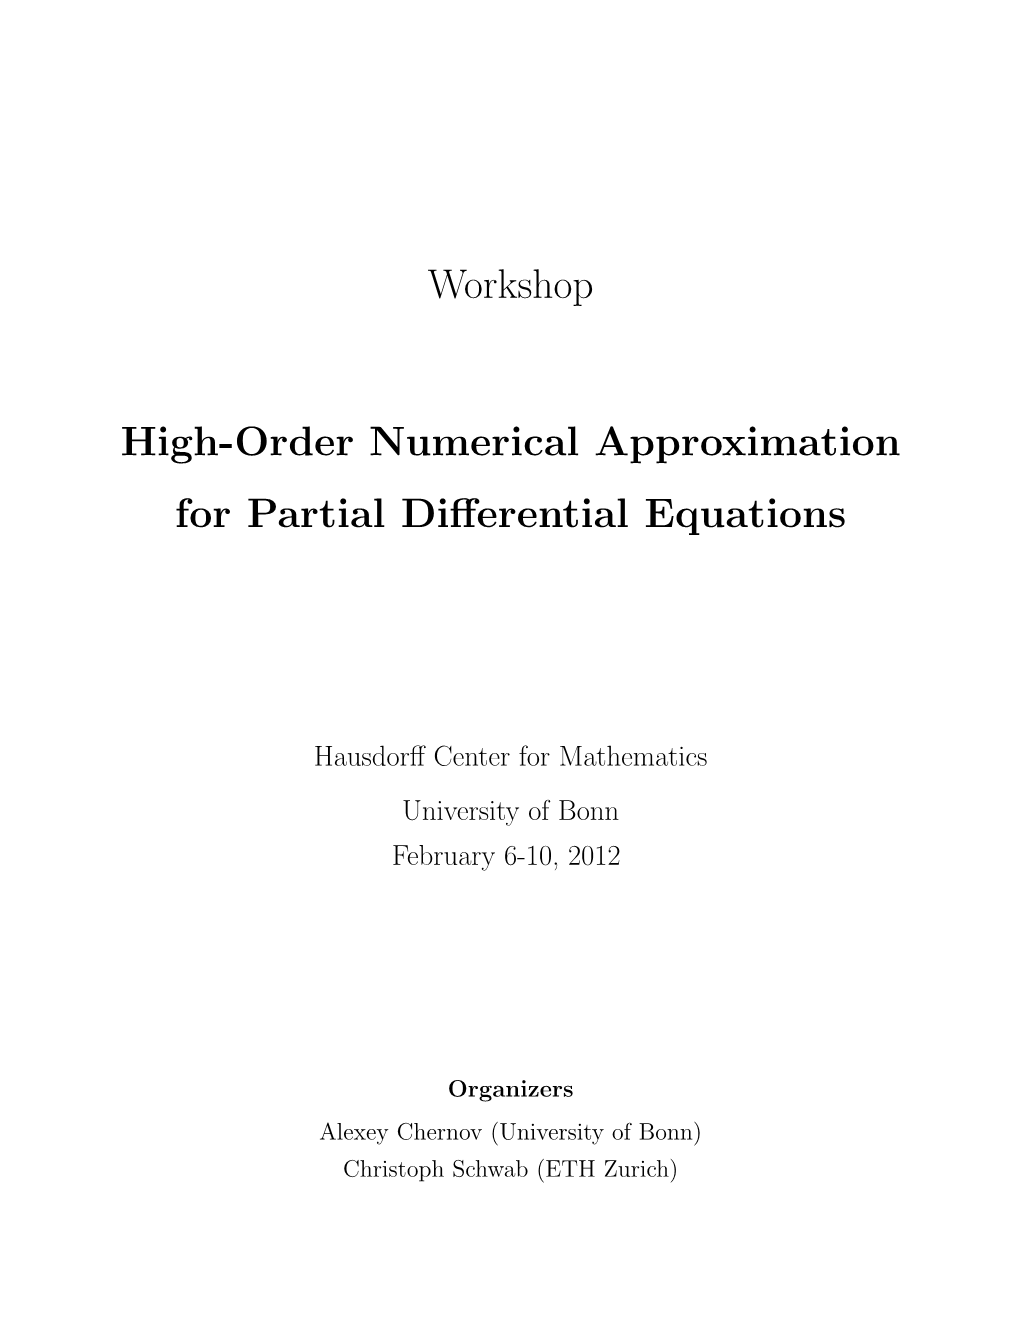 Workshop High-Order Numerical Approximation for Partial Differential Equations